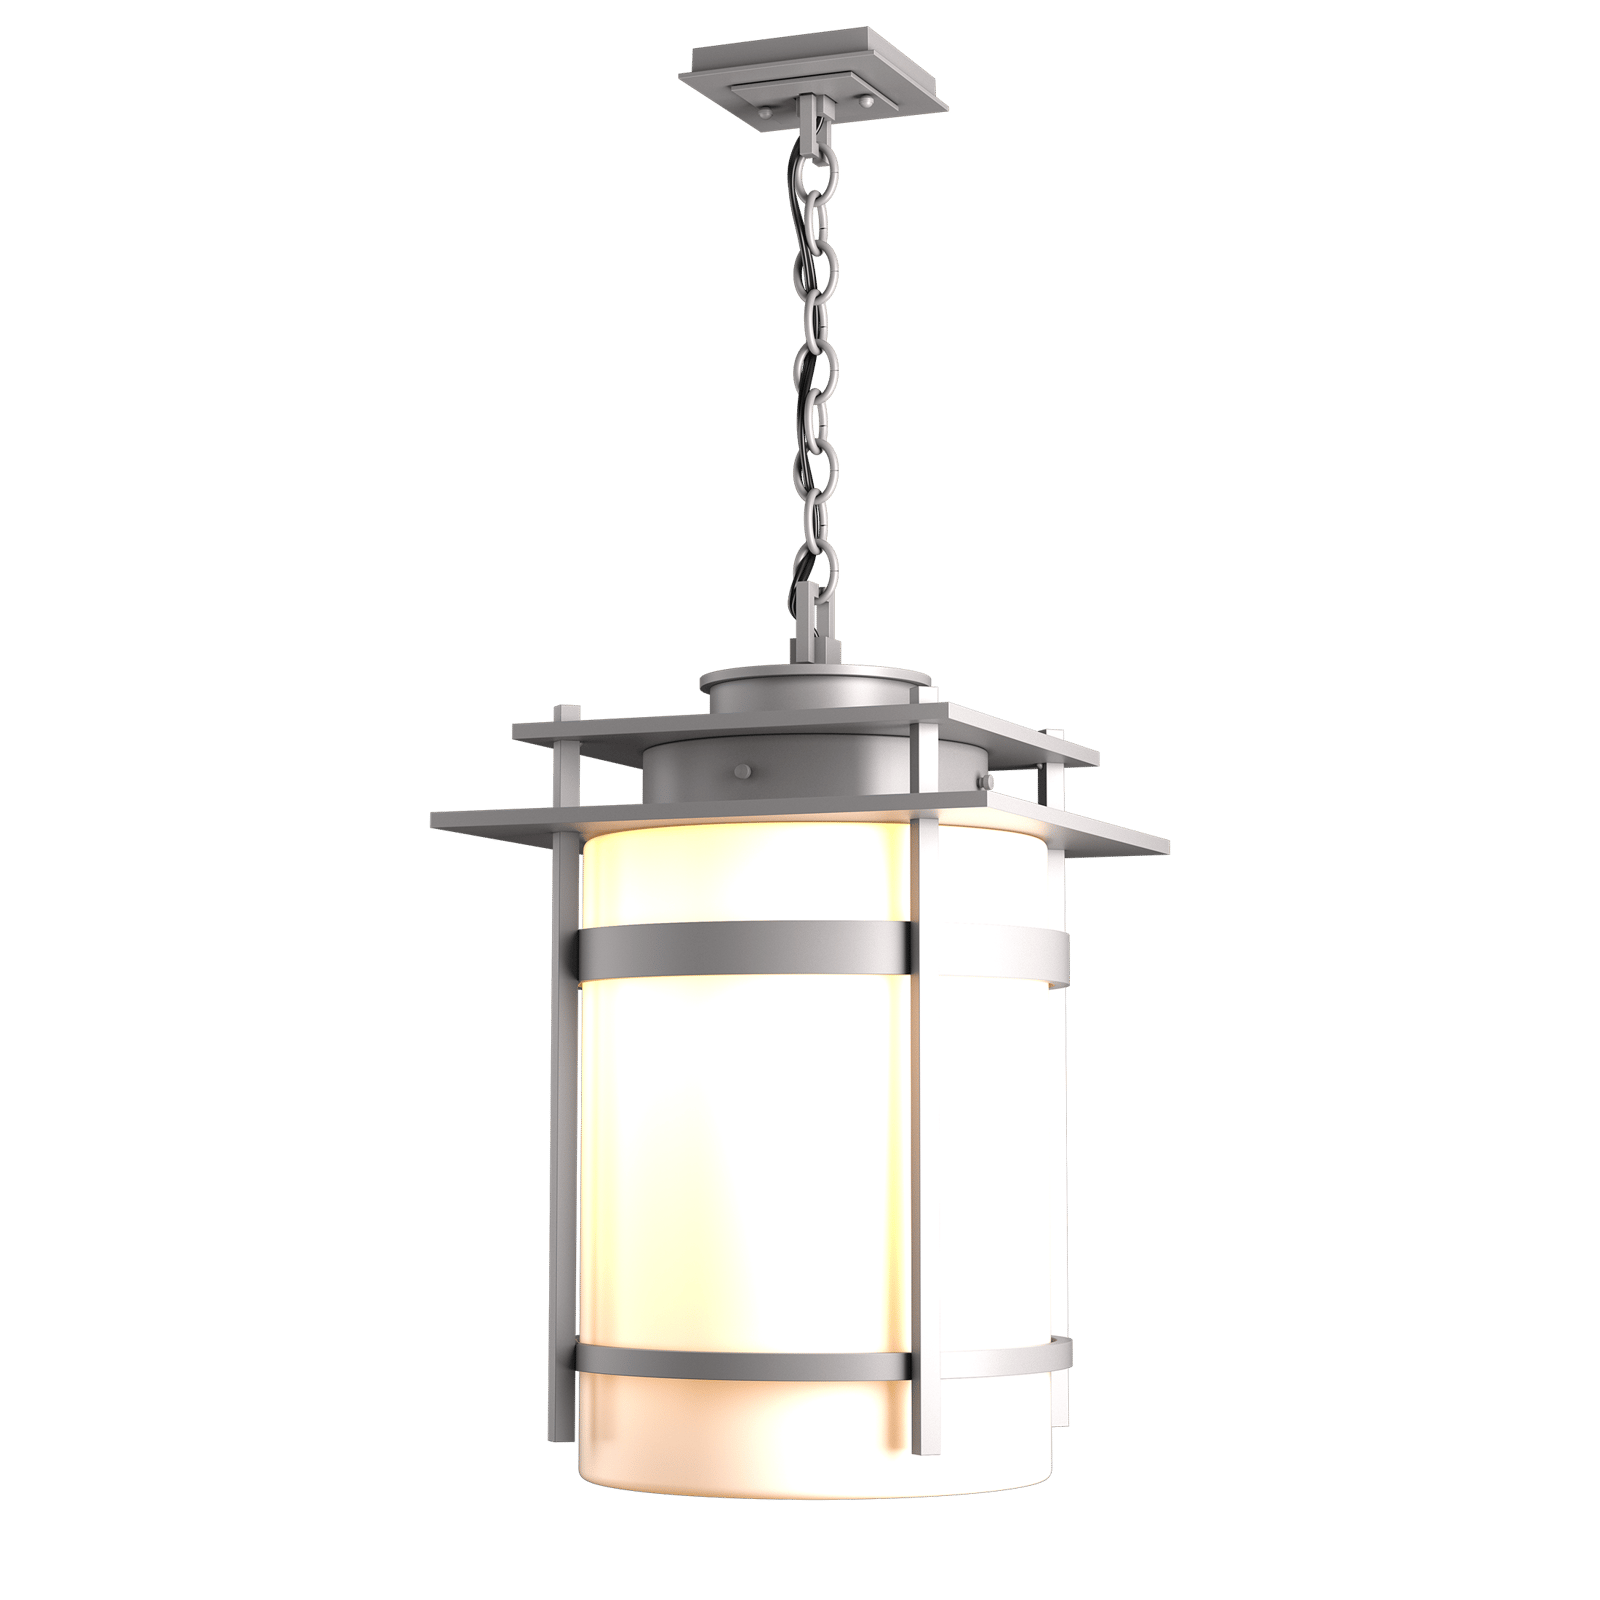 Hubbardton Forge Banded Large Outdoor Fixture